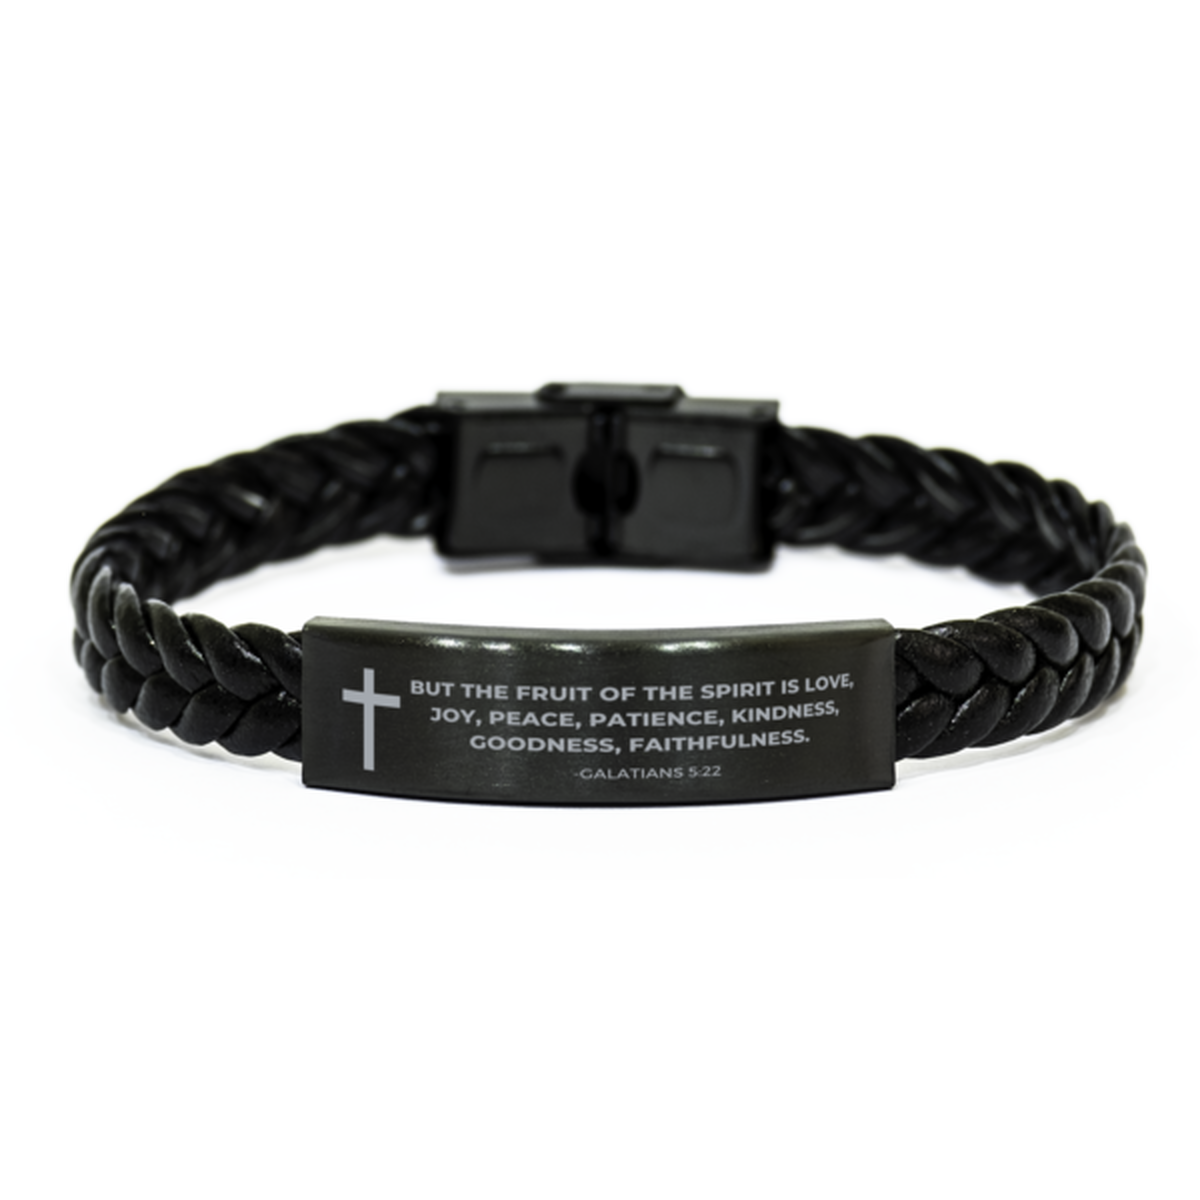 Baptism Gifts For Teenage Boys Girls, Christian Bible Verse Braided Leather Bracelet, But the fruit of the Spirit, Catholic Confirmation Gifts for Son, Godson, Grandson, Nephew